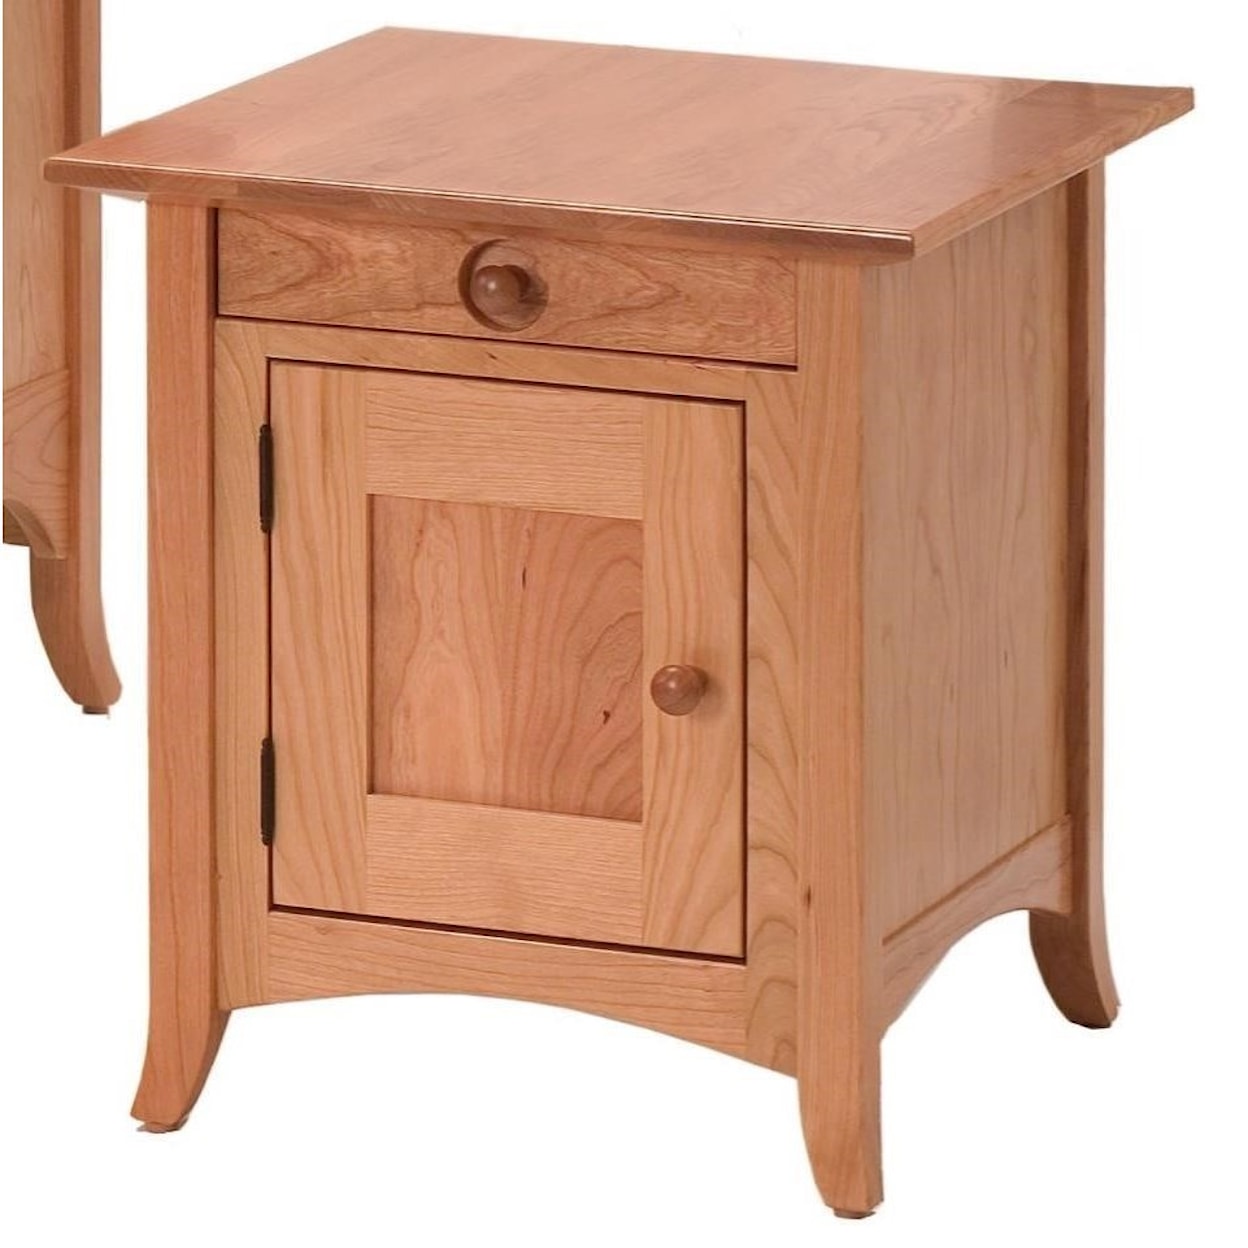 Crystal Valley Hardwoods Shaker Hill End Table